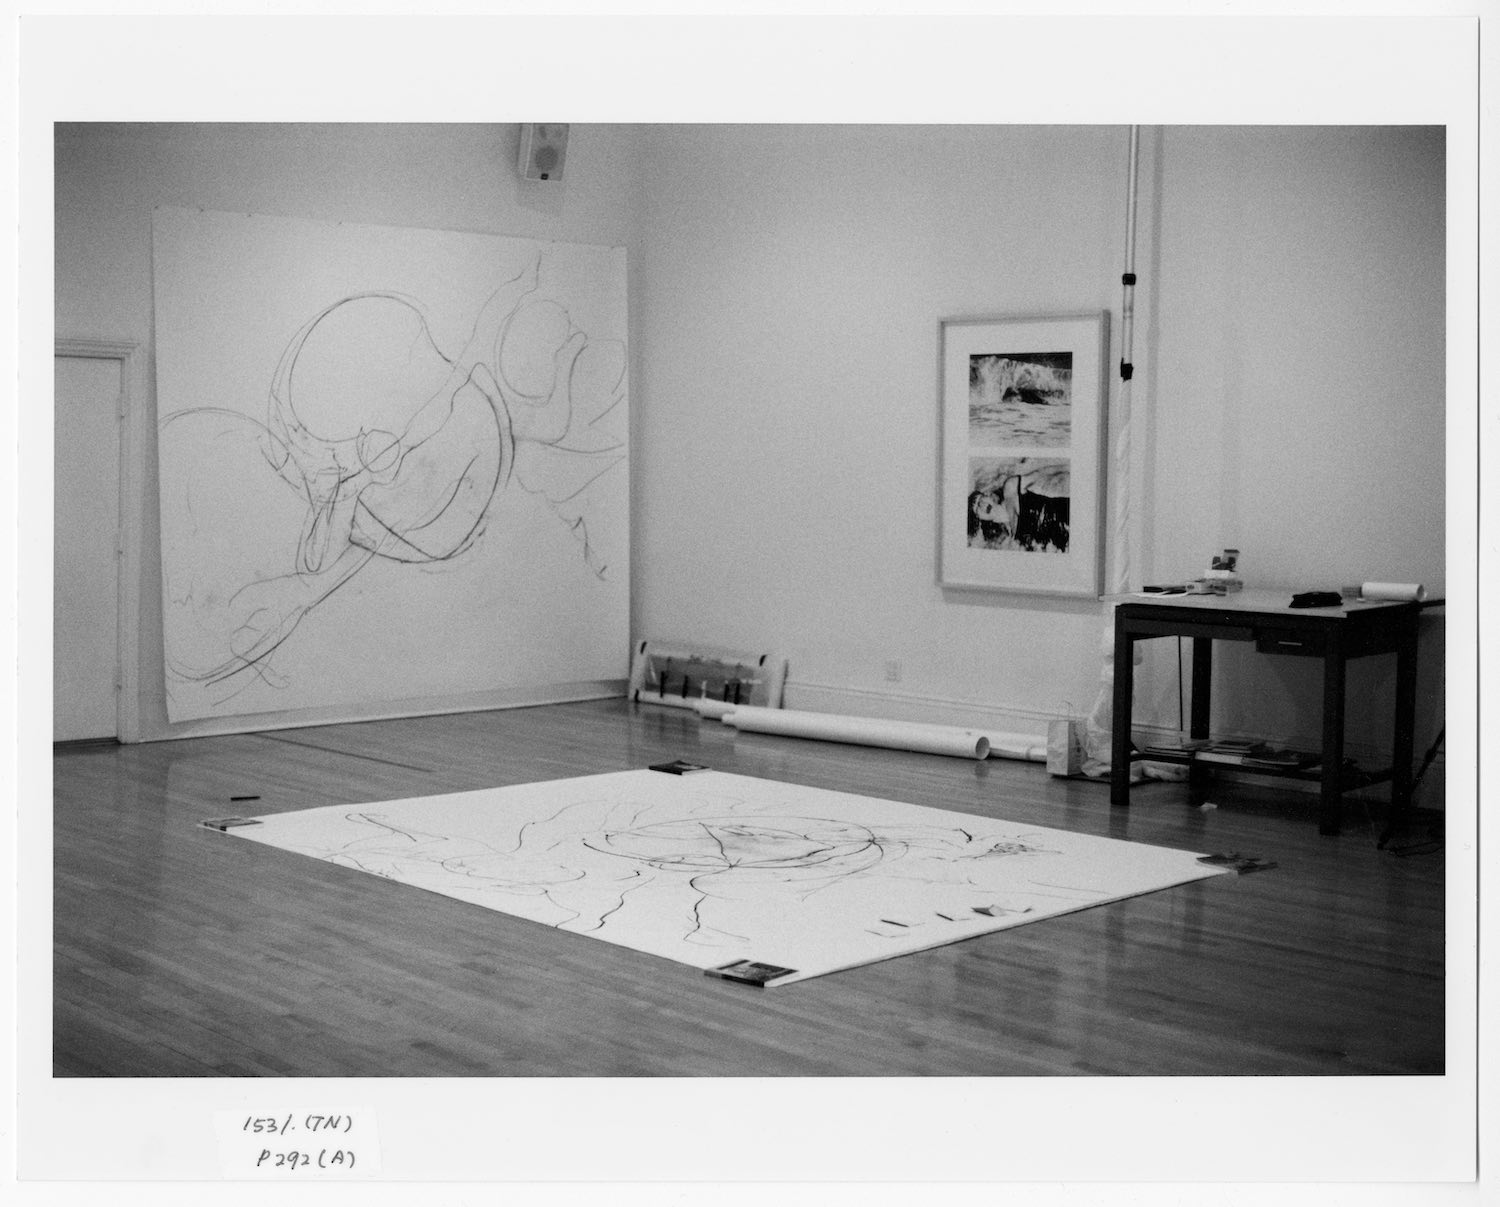 View of Trisha Brown’s loft with drawings Untitled (New York) , 2001, Charcoal on paper, 102 x 120 inches (259.1 x 30 4.8 cm) (wall, left); Untitled (New York) , 2001, 102 x 120 inches (259.1 x 304.8 cm) (floor); and Burt Barr’s Double Feature , 2000, Lithograph, 53.5 x 38.75 inches (135.9 x 98.4 cm) (wall, right), New York, December 2001. Photograph © Burt Barr.